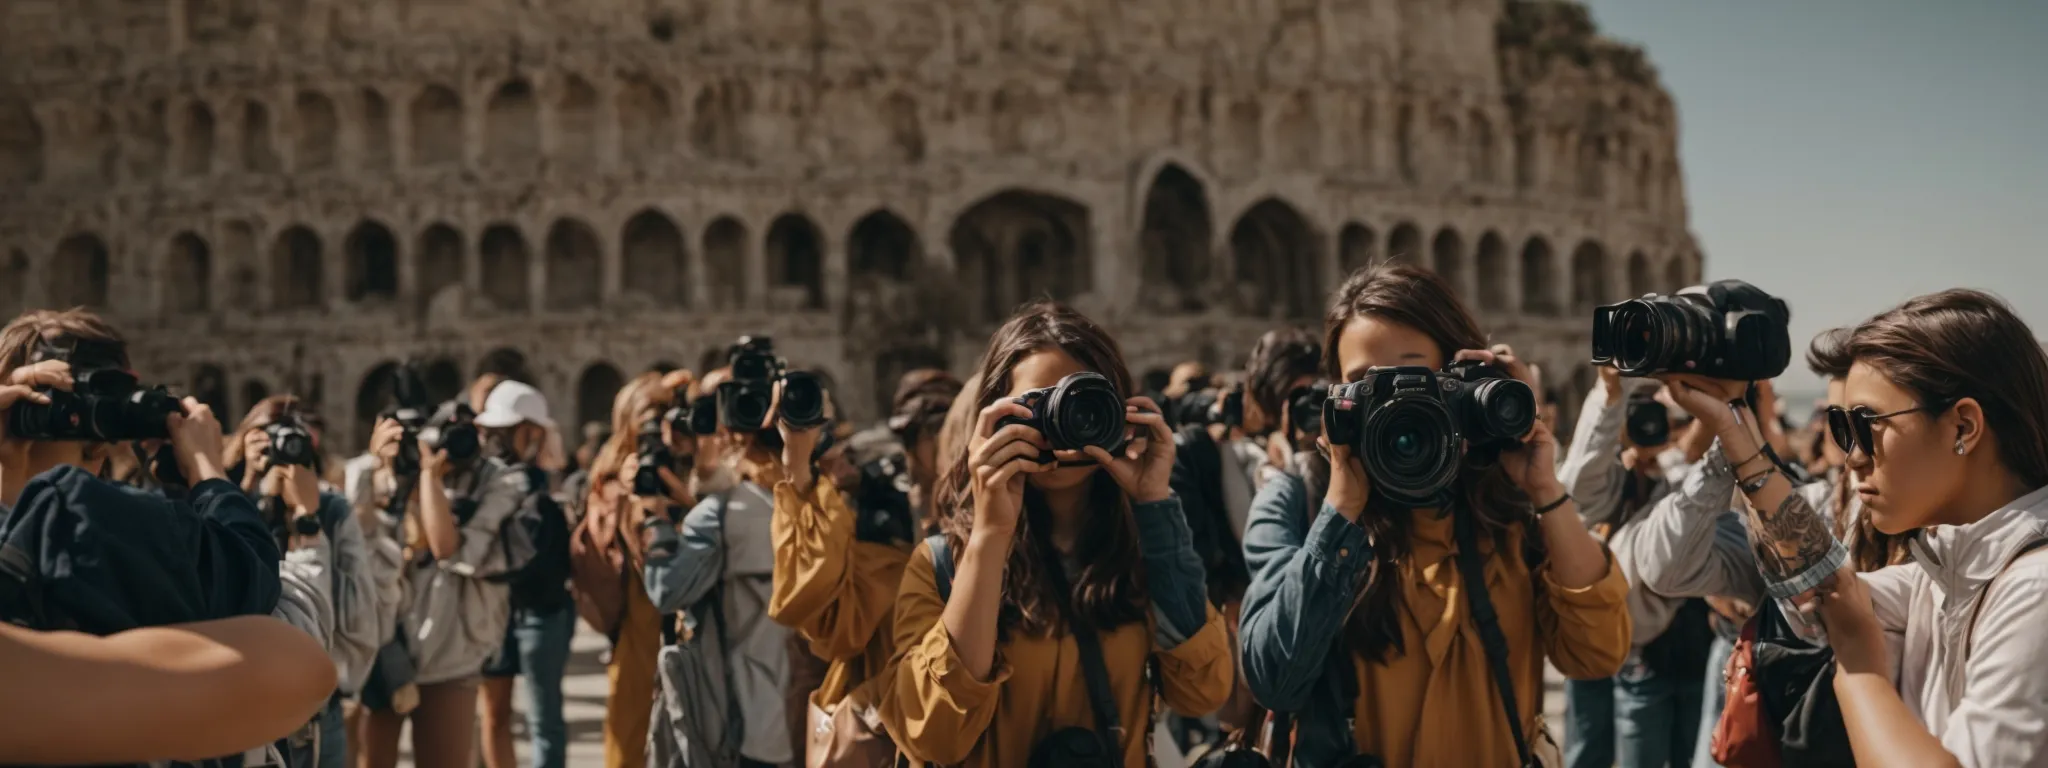 a group of tourists taking photos with their cameras and smartphones in front of a famous landmark.